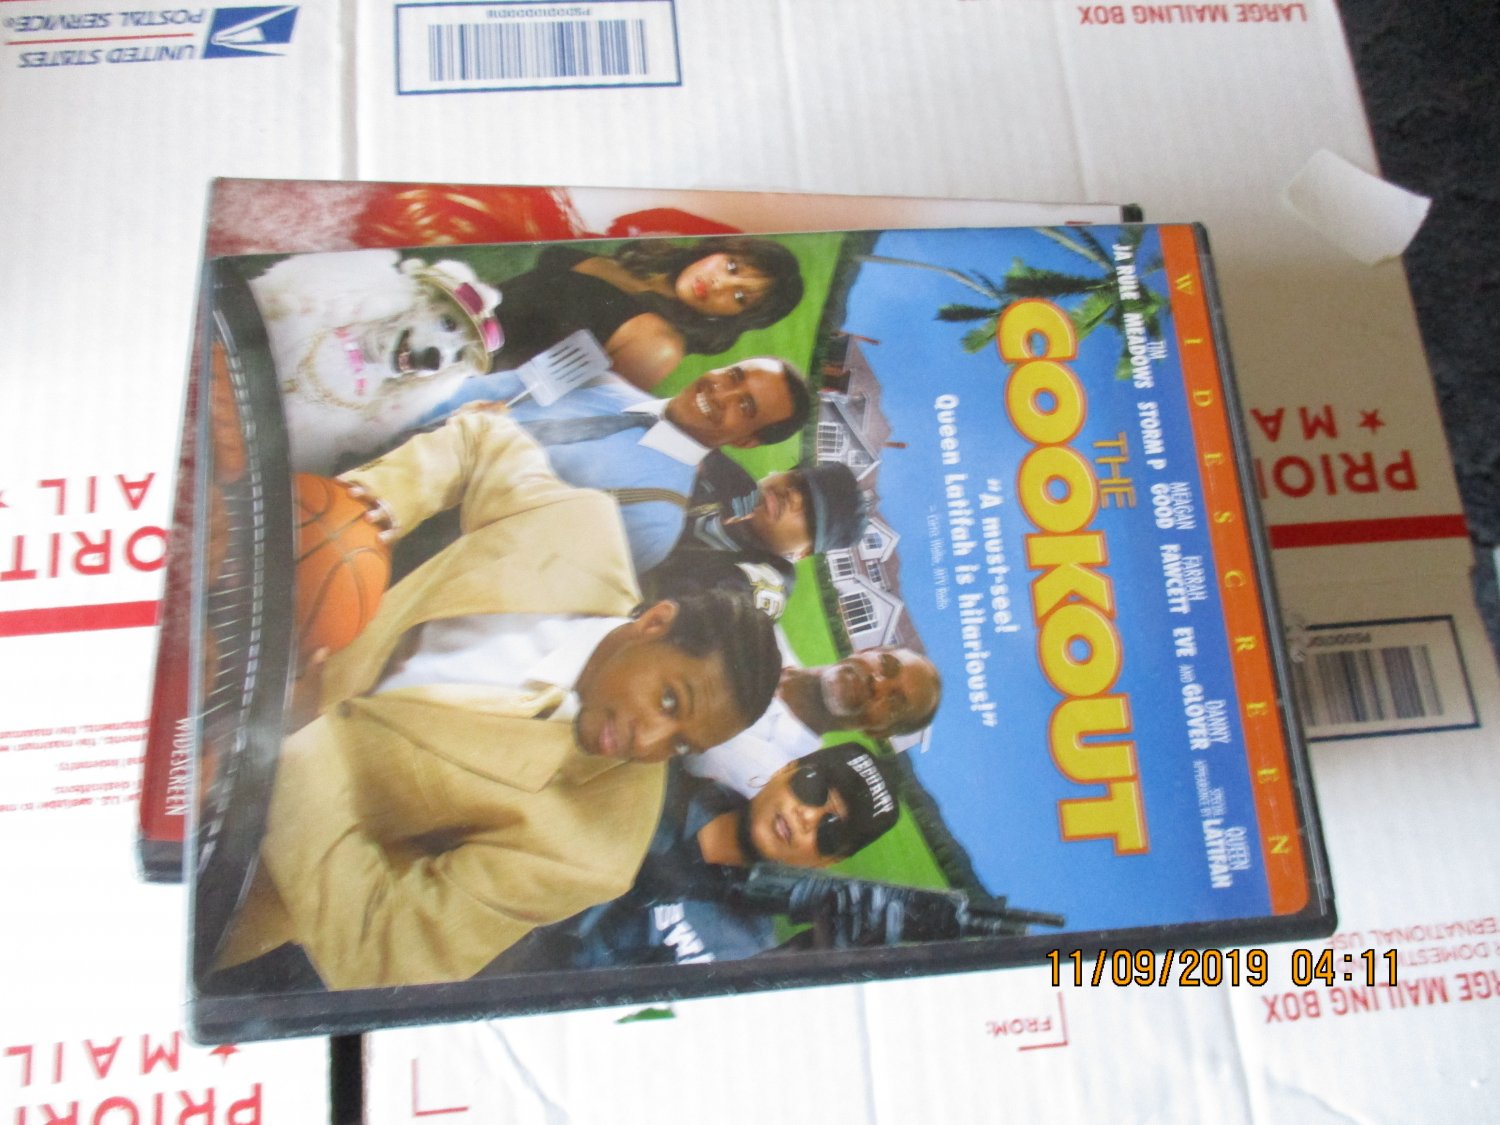 The Cookout dvd